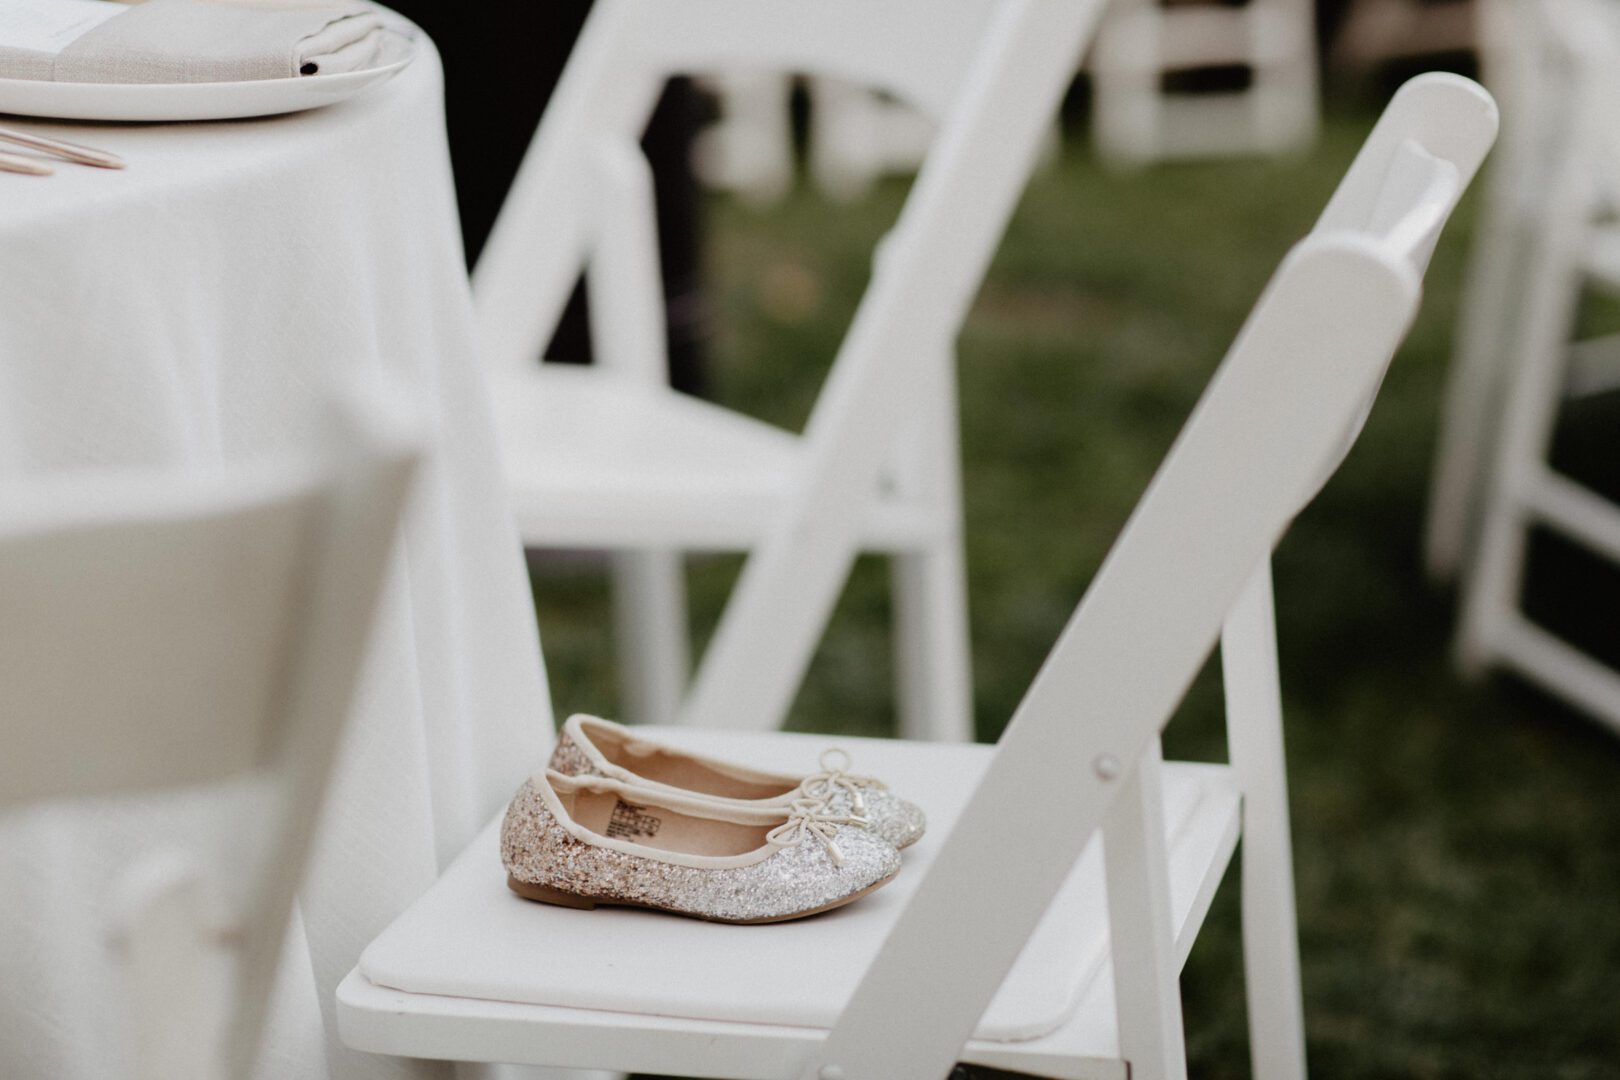 A little girl's shoe sits on a chair at a wedding.